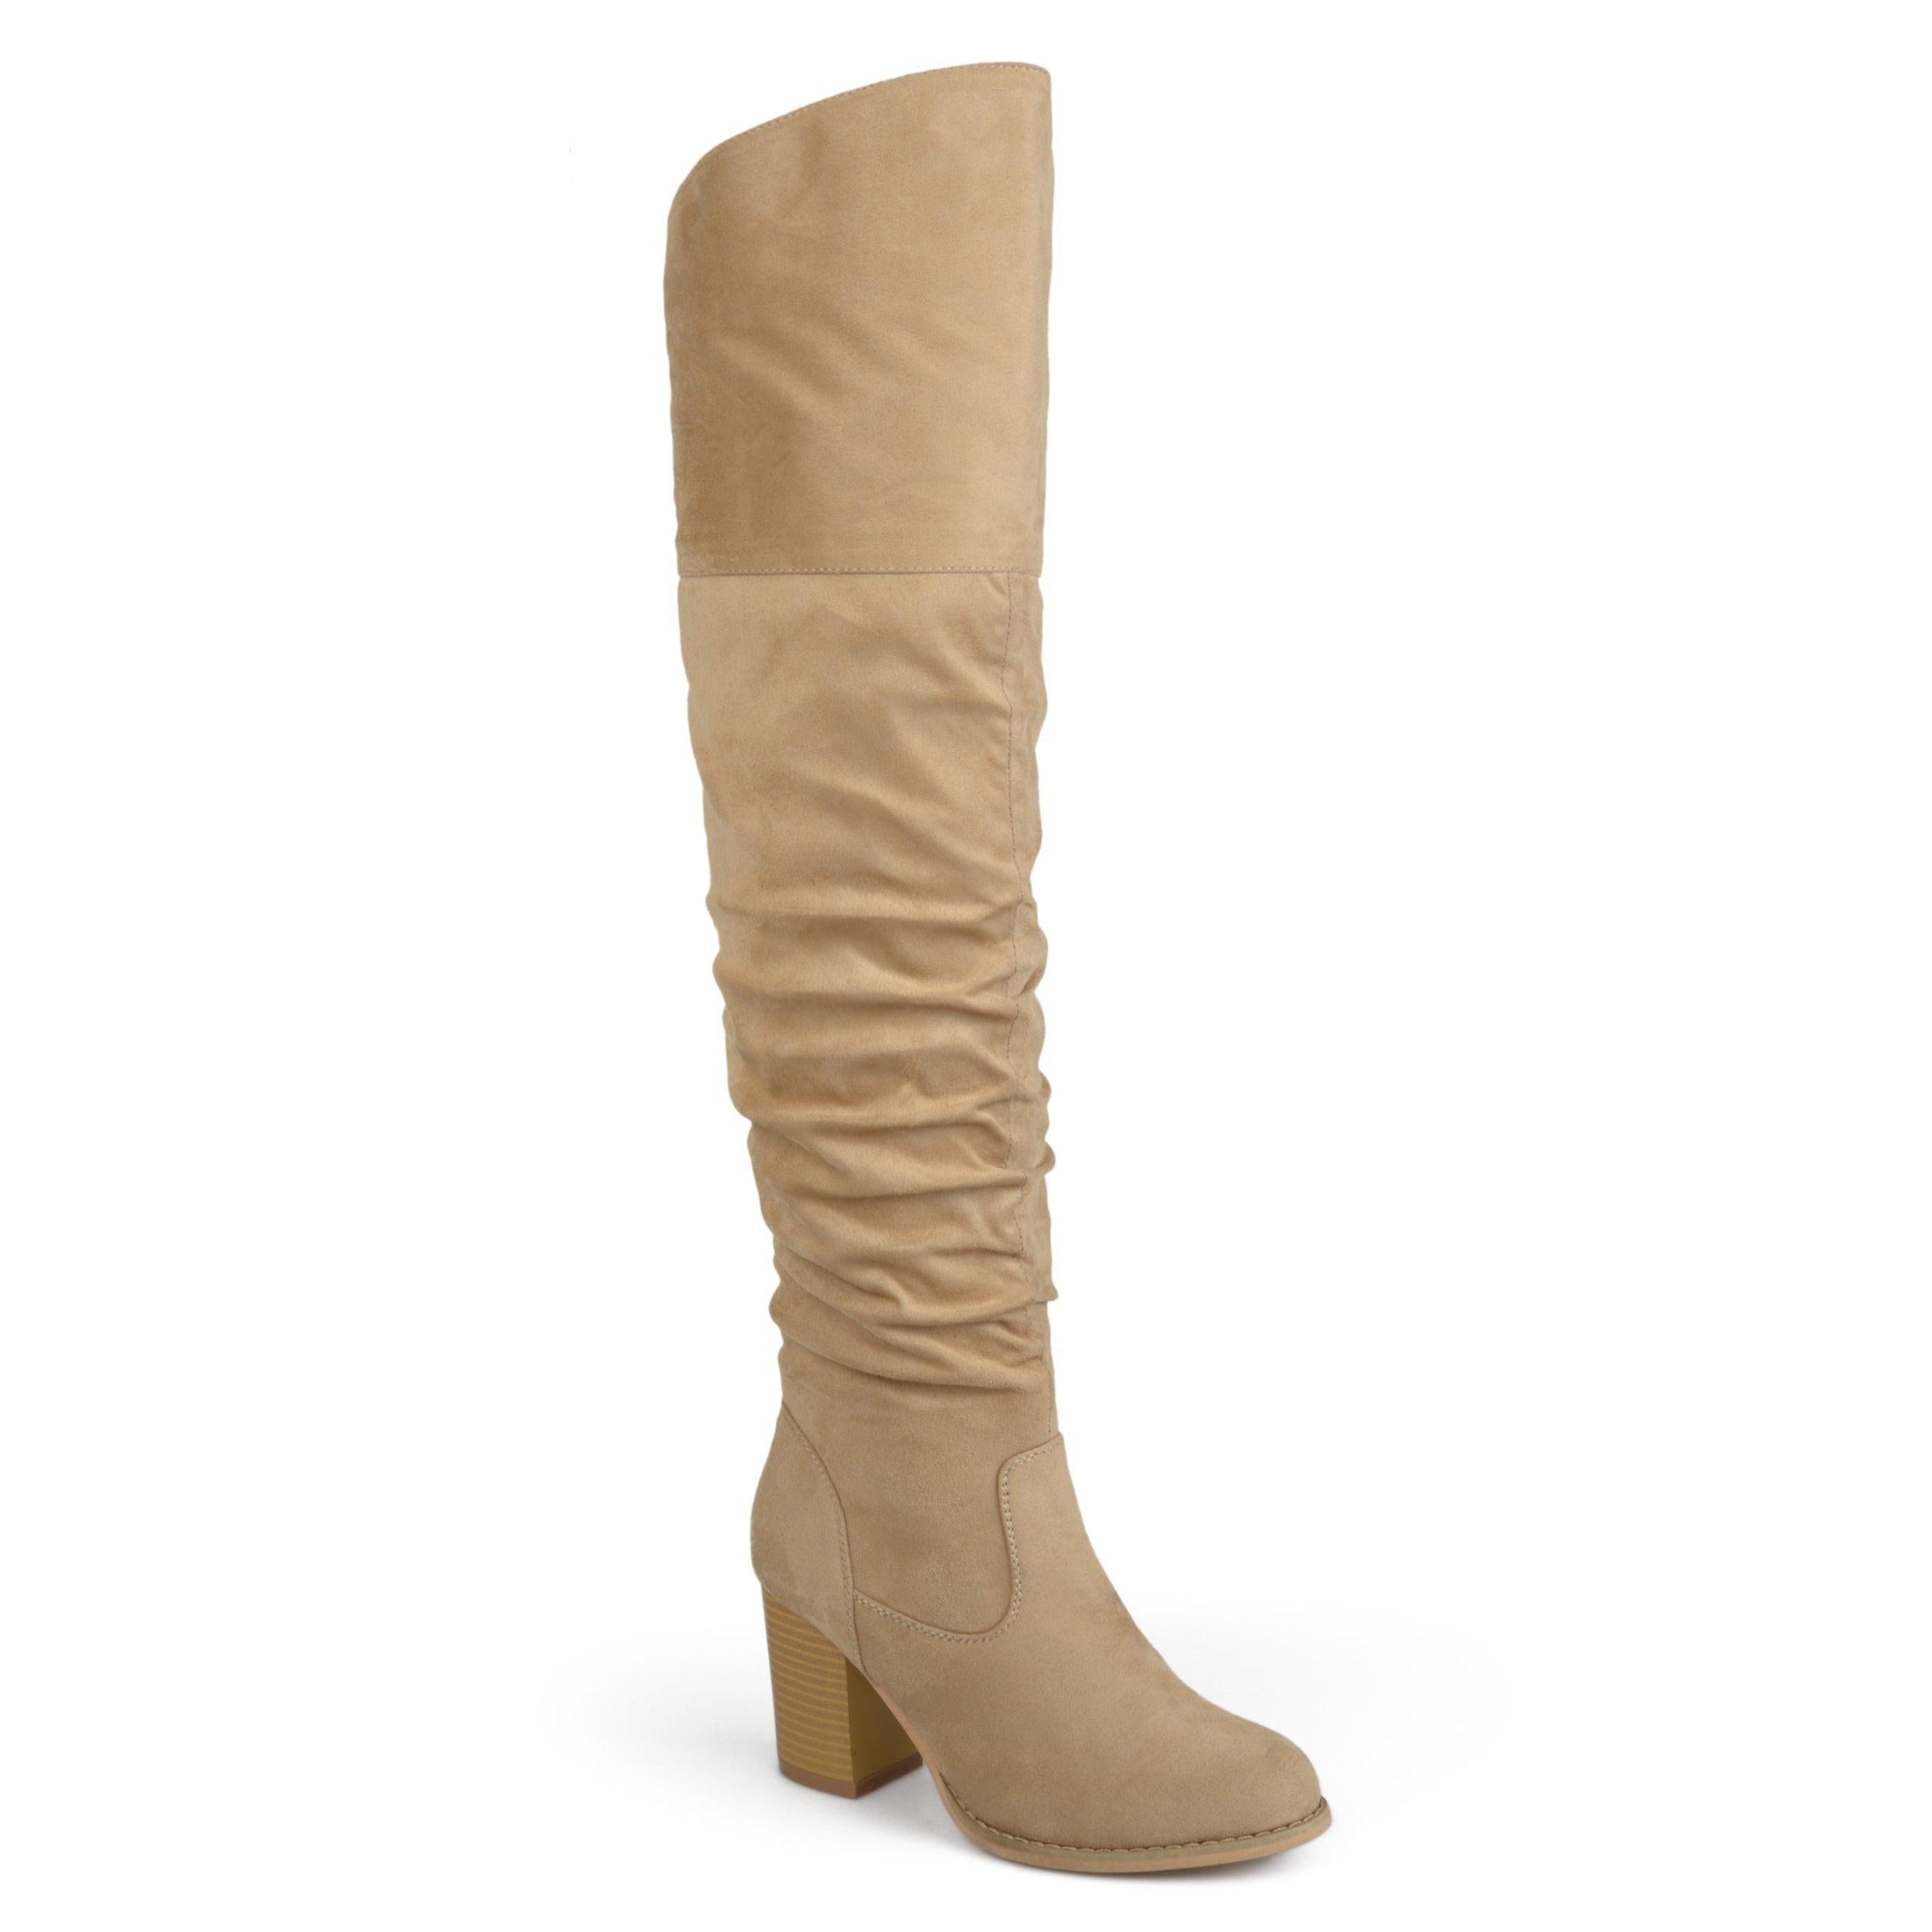 Kaison Boot | Women's Over The Knee Boots | Journee Collection